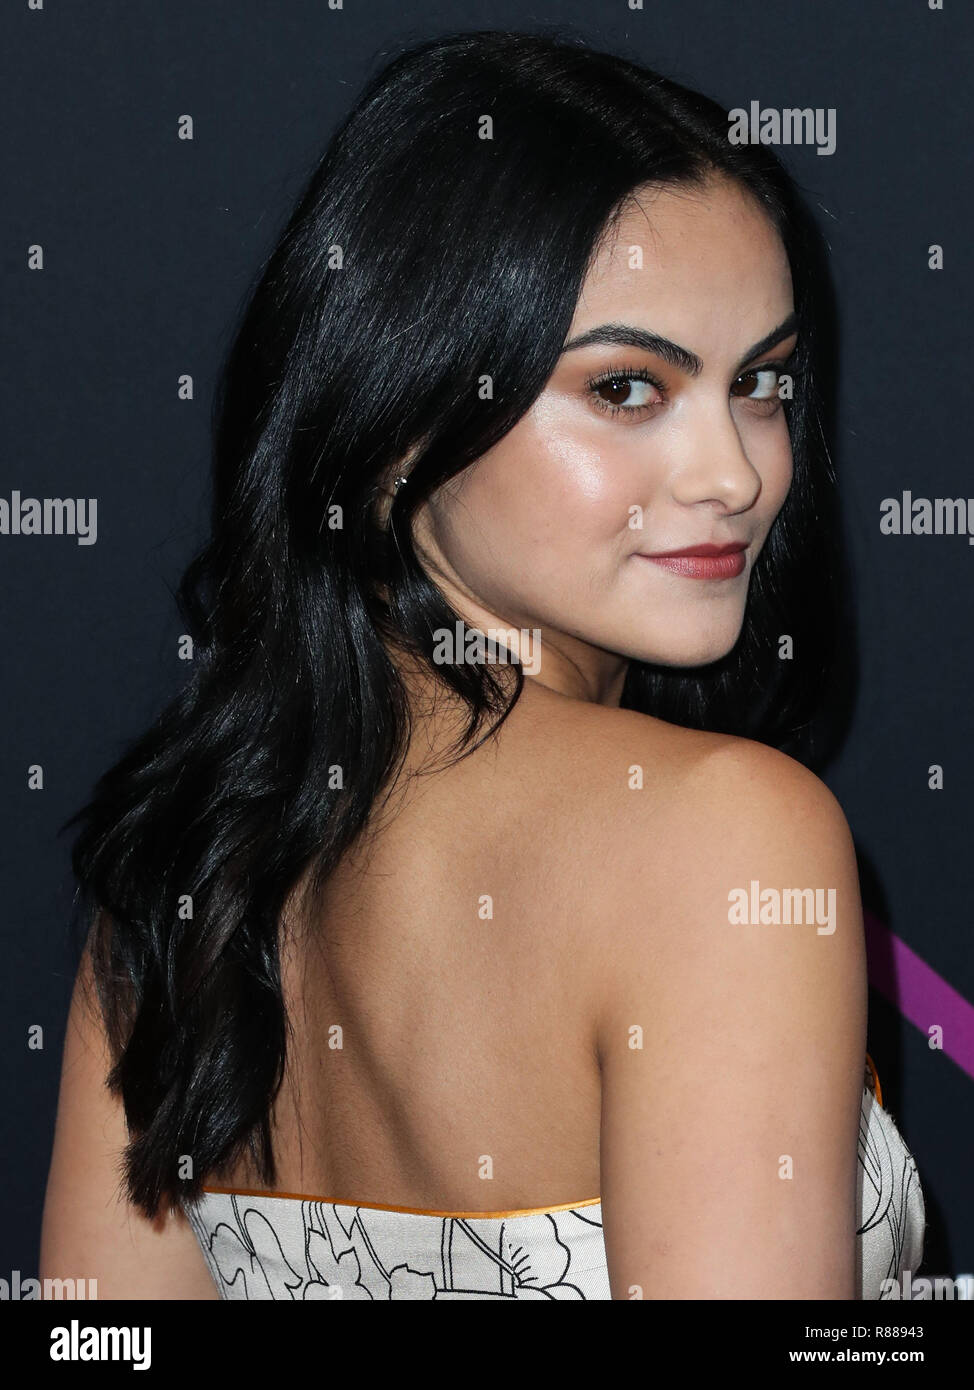 SANTA MONICA, LOS ANGELES, CA, USA - NOVEMBER 11: Actress Camila Mendes  wearing an Etro dress, Tory Burch shoes, and Clean Origin jewelry (styled  by Jason Bolden) arrives at the People's Choice